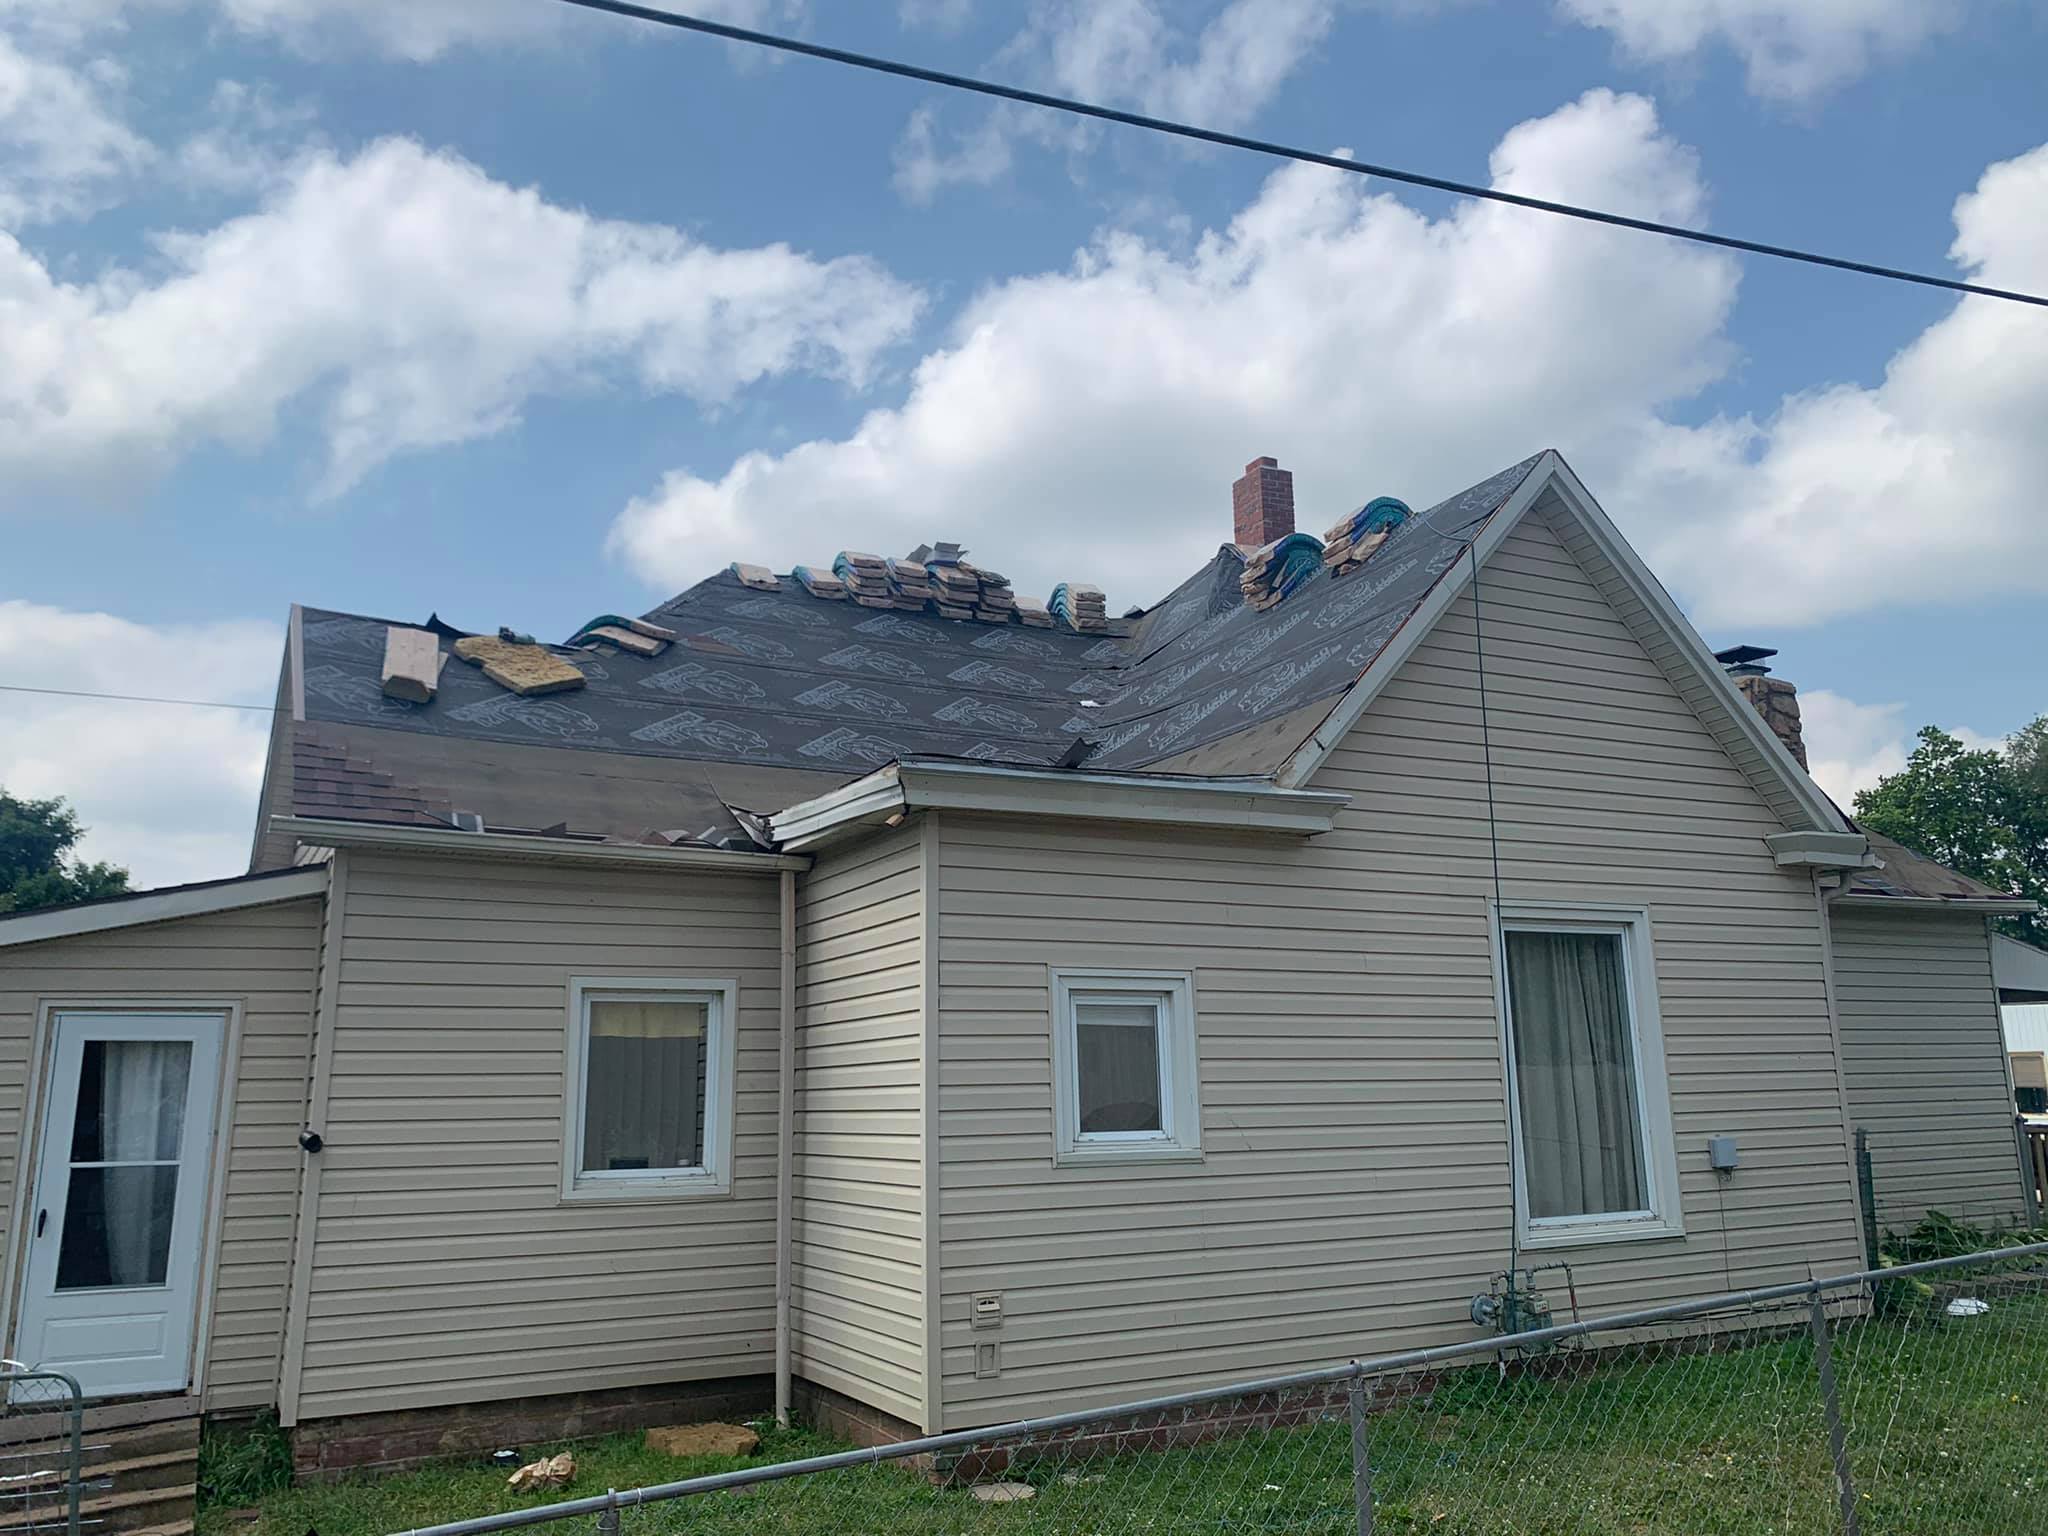 Roofing Companies Near Savannah Missouri - Top Tips For Finding The Best Company